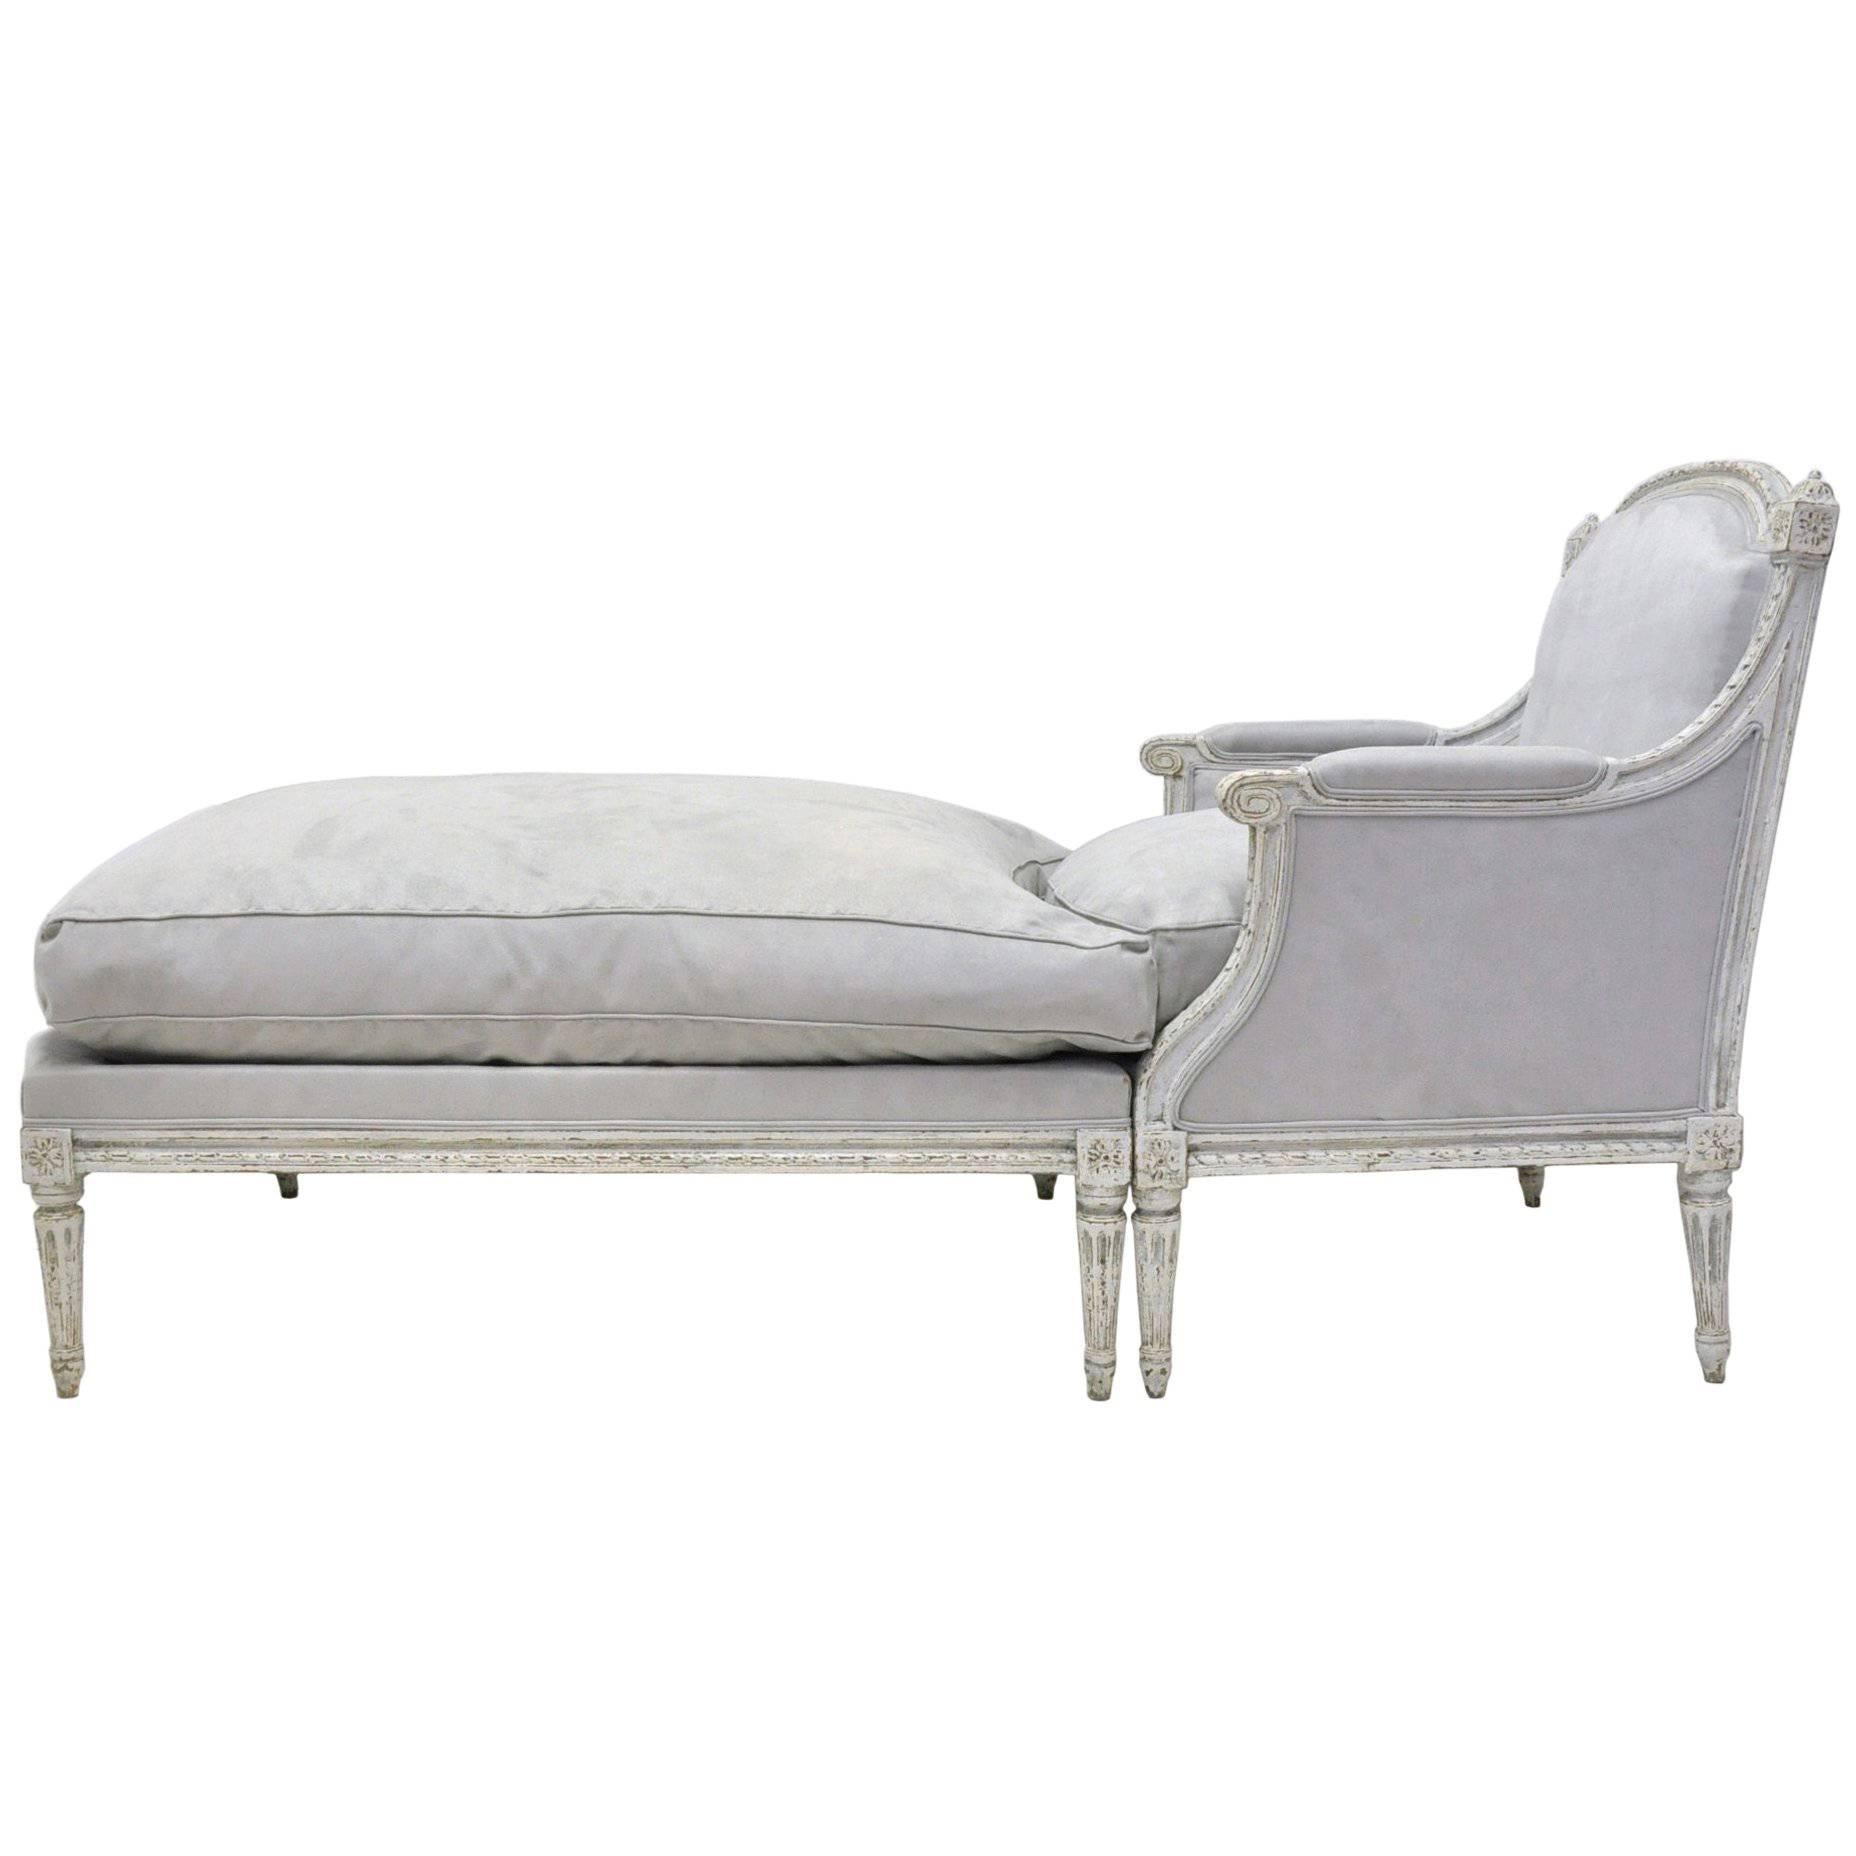 19th Century French Louis XVI Carved Painted Two-Piece Chaise from Paris